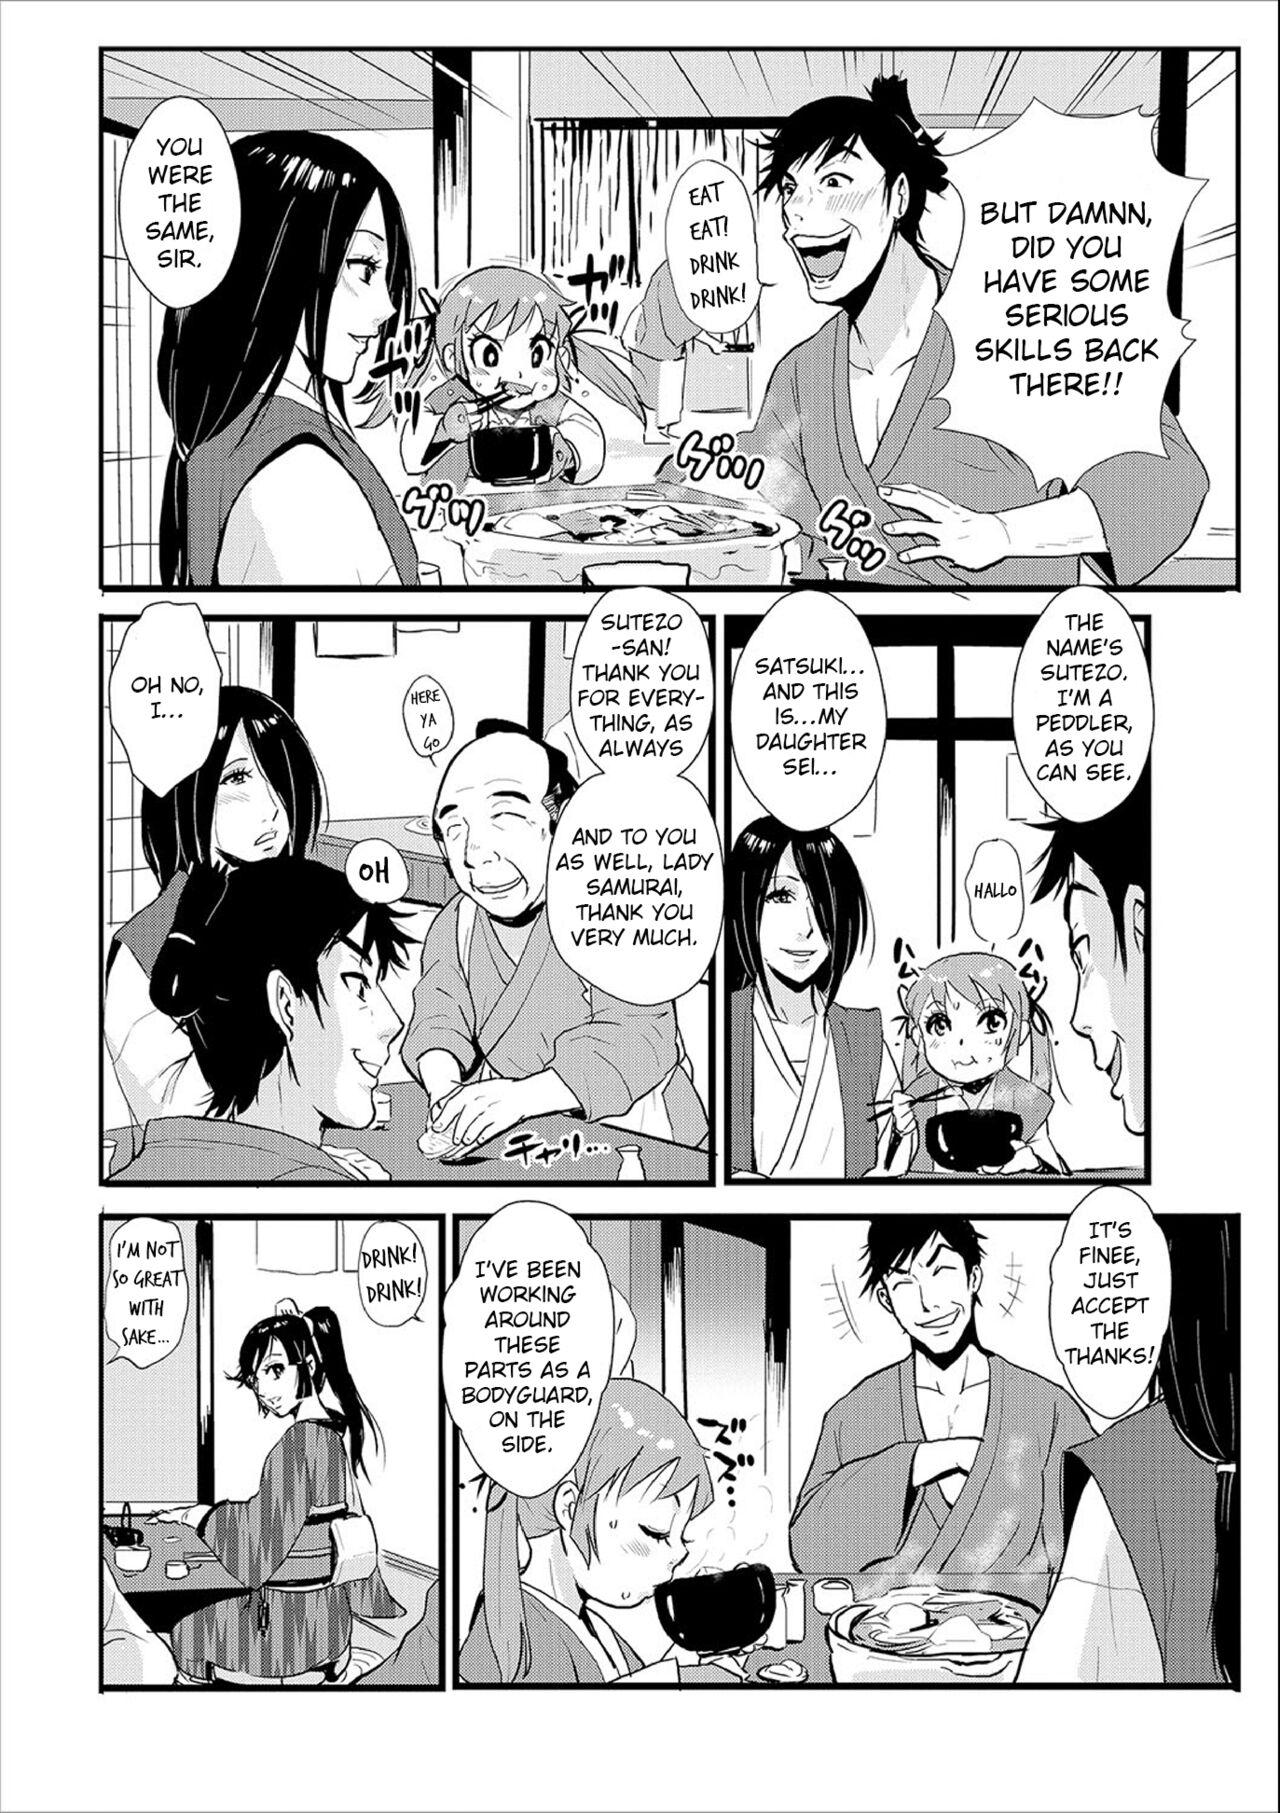 Knocked Up Samurai 02: The Post Town and the Ronin, Tied and Teased 7